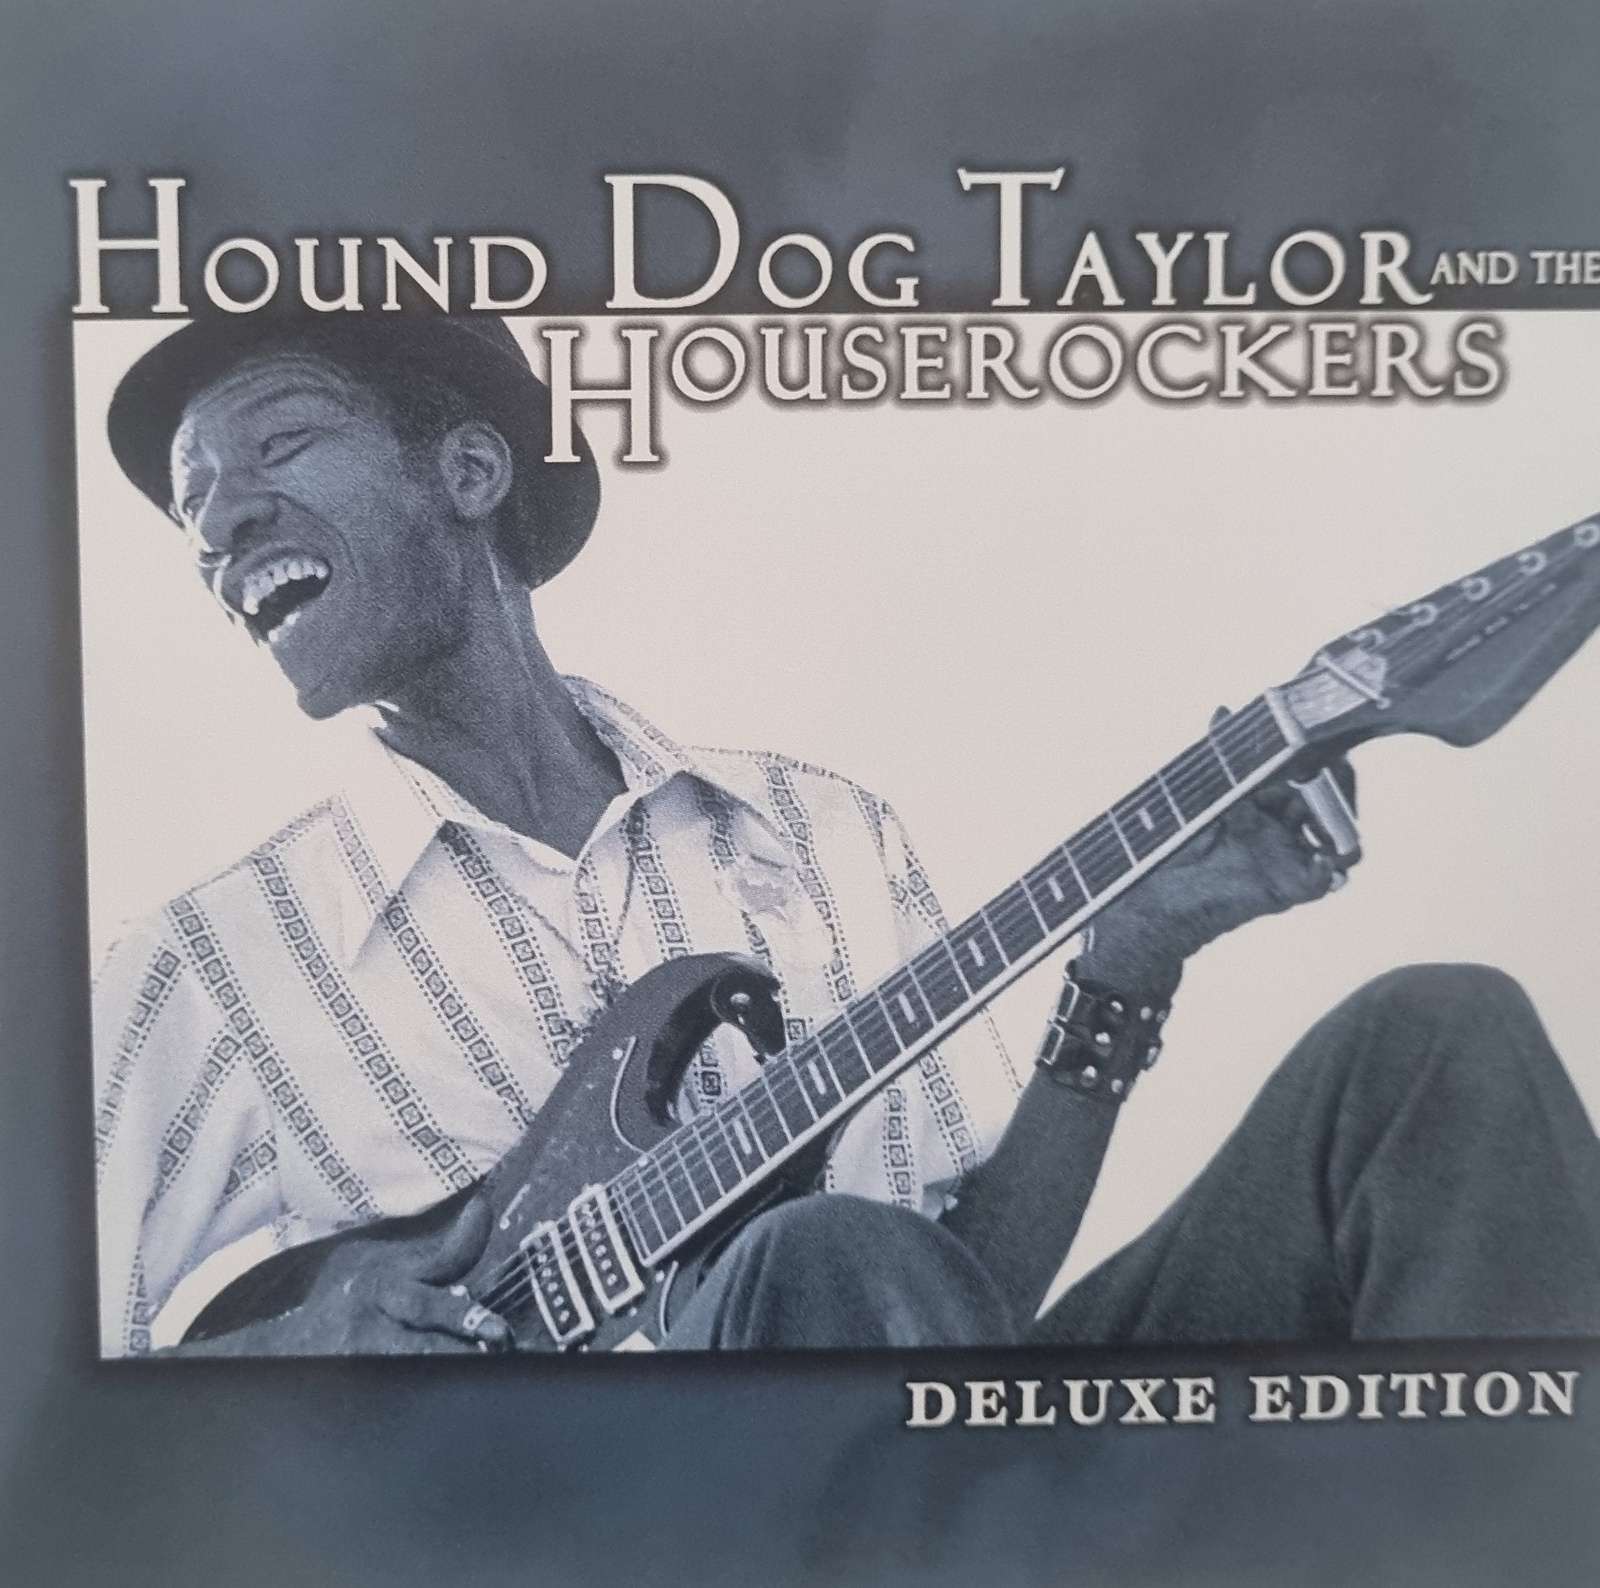 Hound Dog Taylor and the Houserockers - Deluxe Edition CD